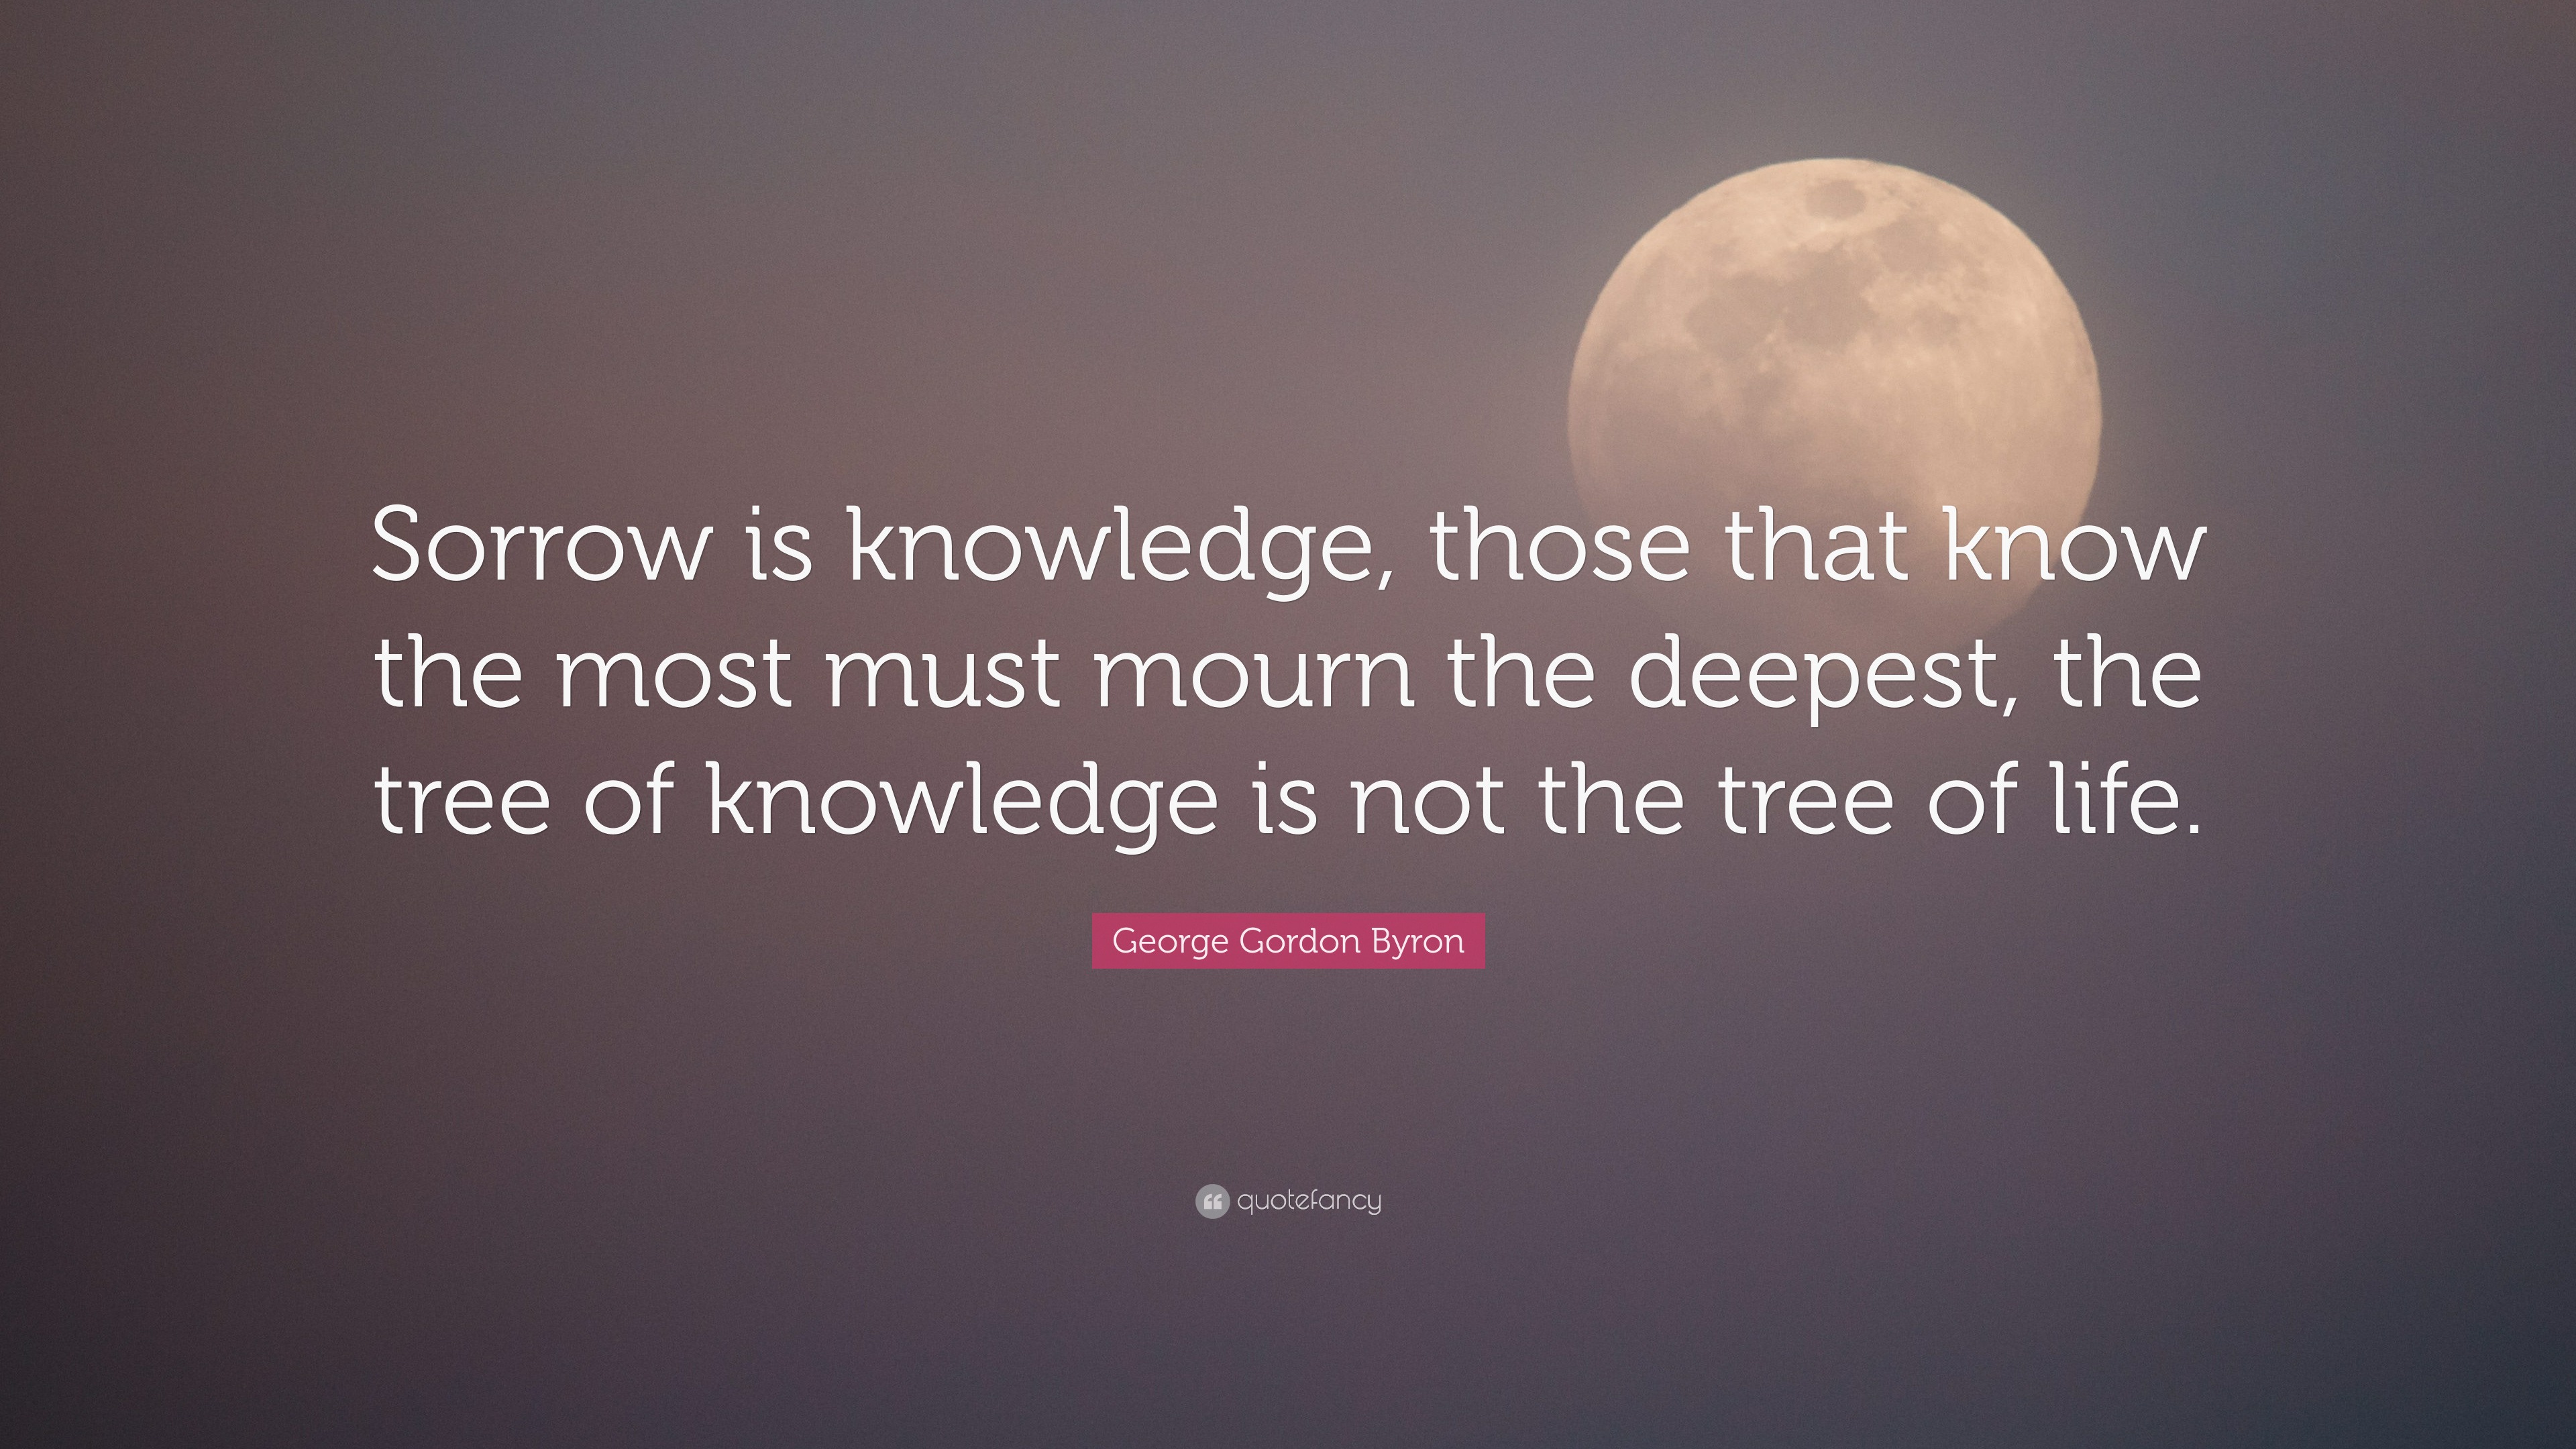 George Gordon Byron Quote: “Sorrow is knowledge, those that know the ...